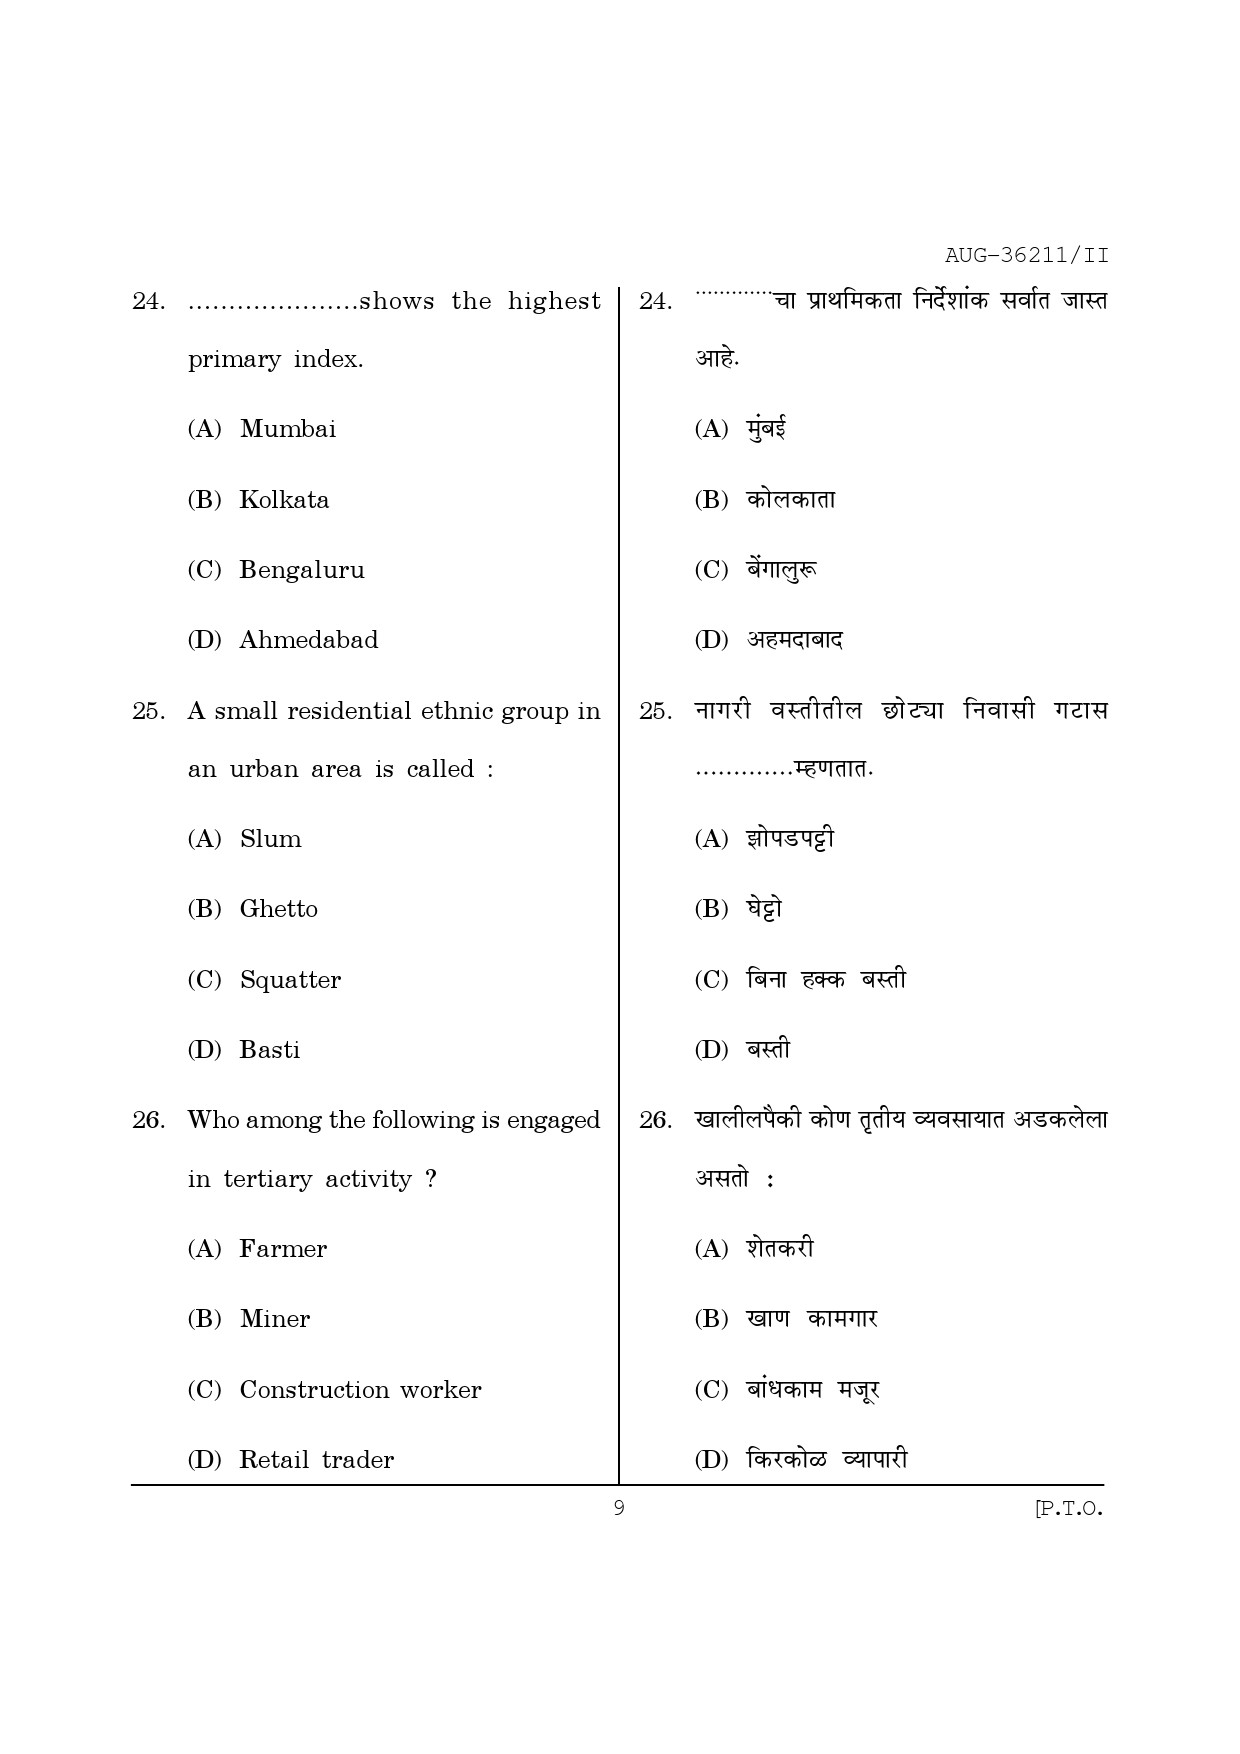 Maharashtra SET Geography Question Paper II August 2011 9